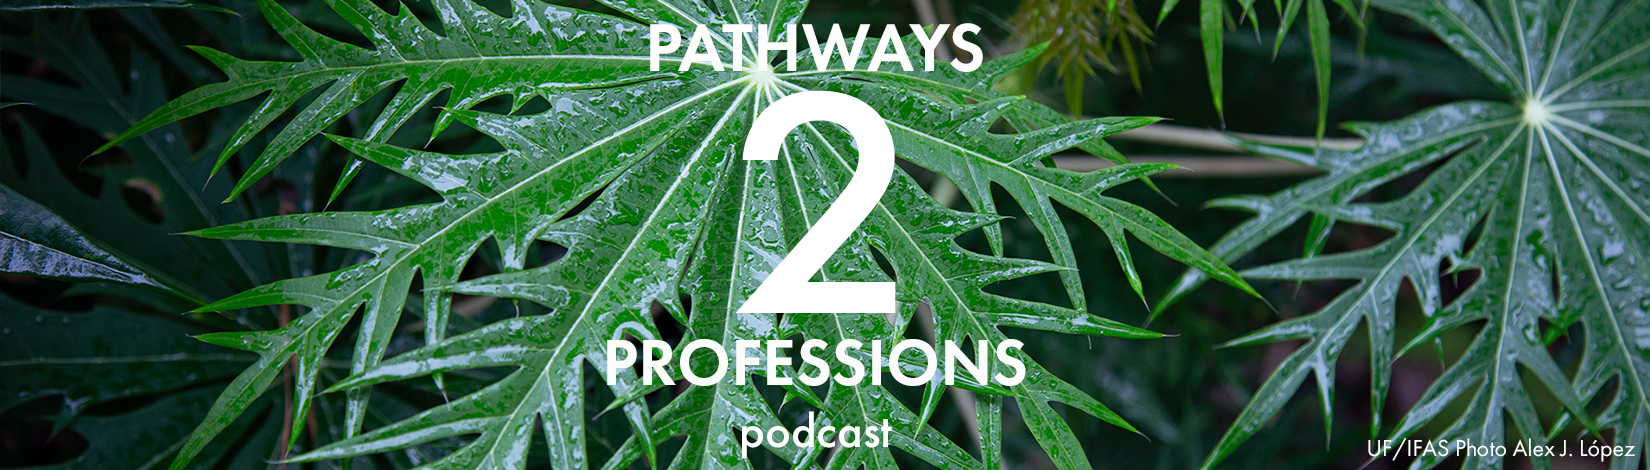 Pathways to Professions podcast title banner image, uf/ifas photo by Alex J. Lopez